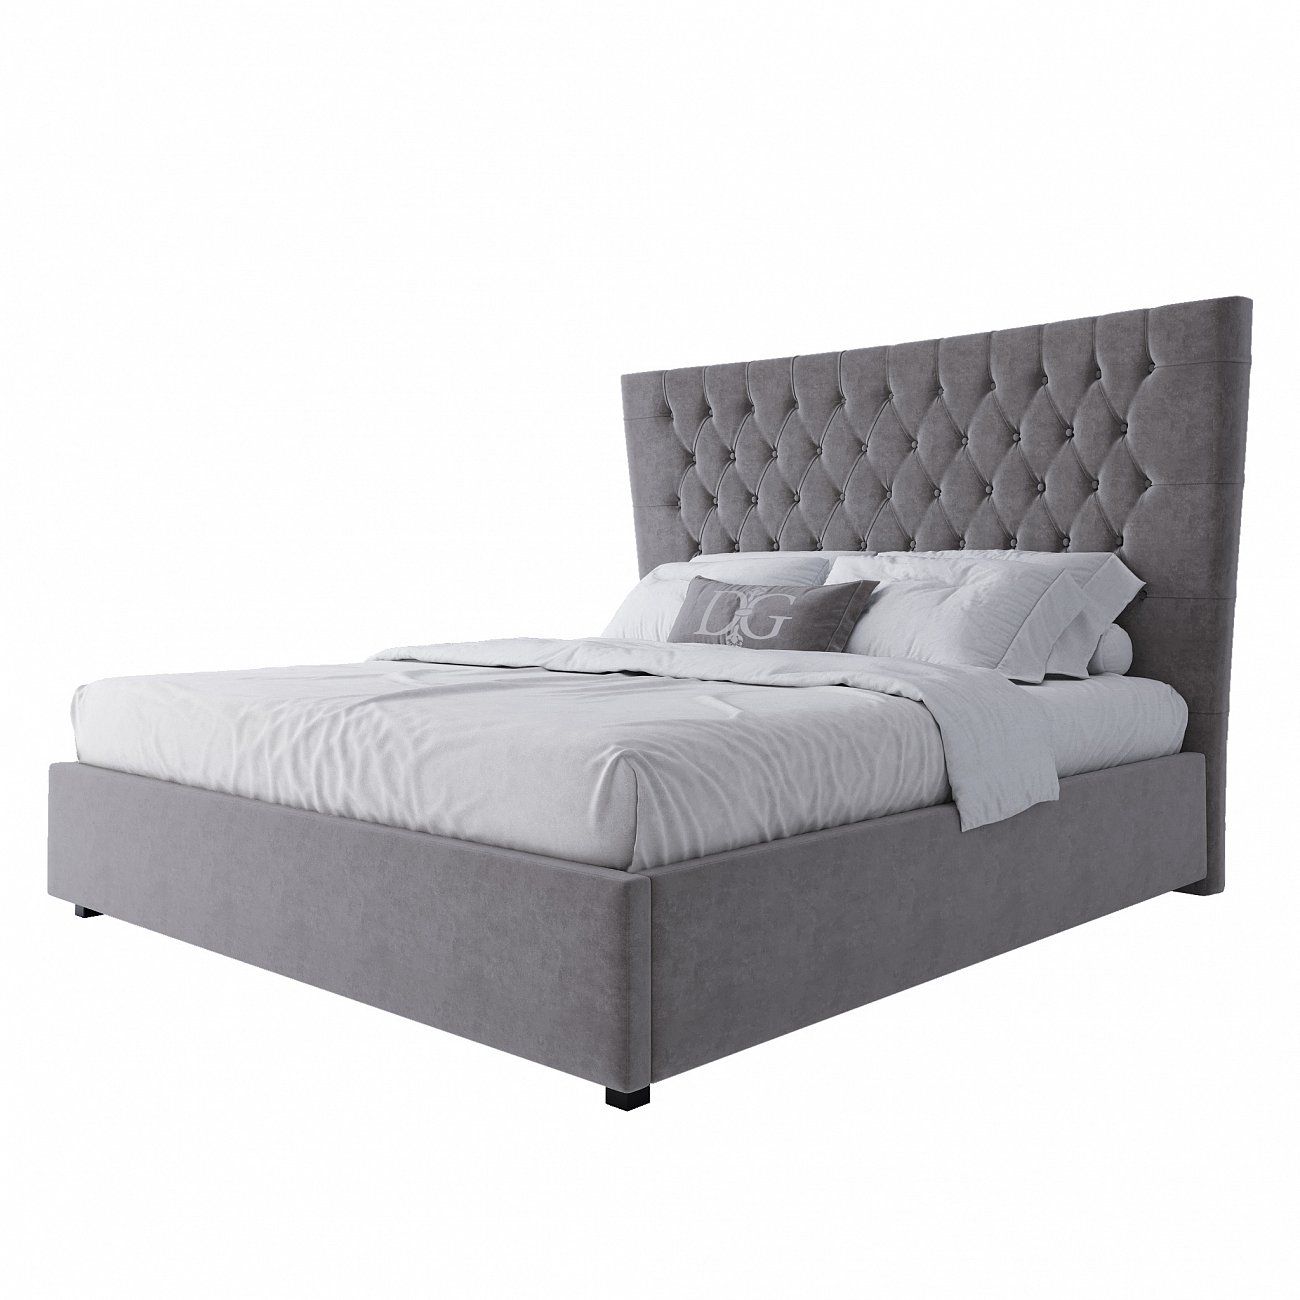 Double bed 180x200 brown-gray velour QuickSand